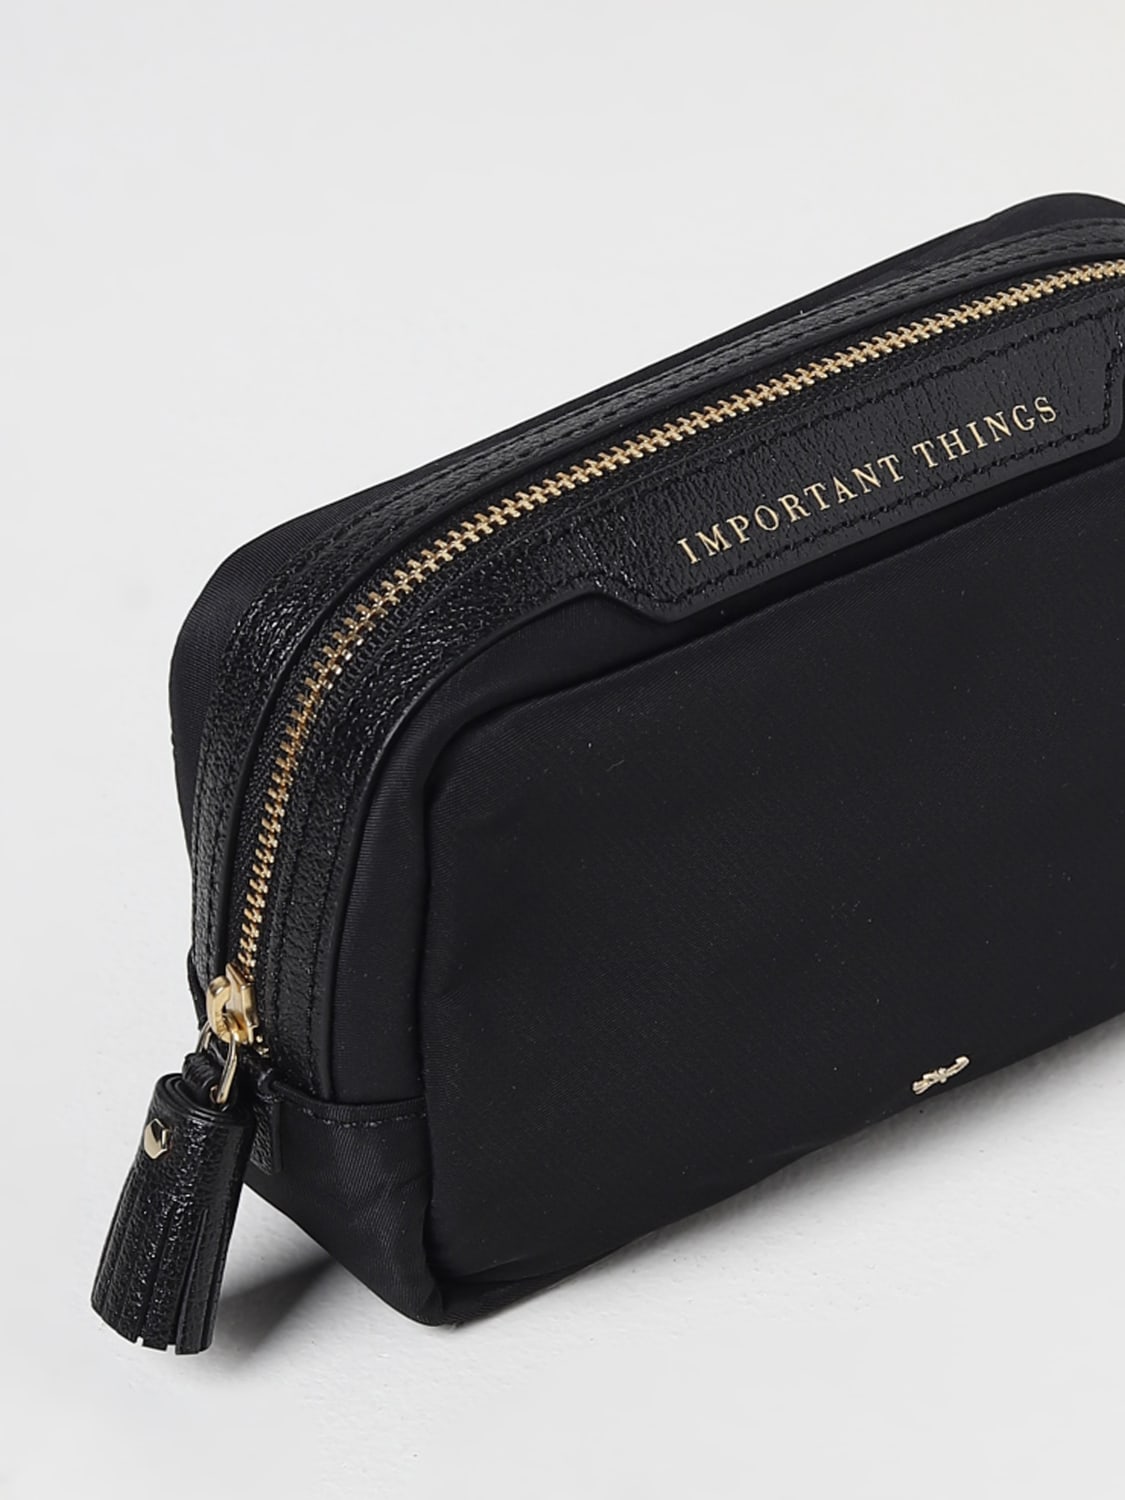 Anya Hindmarch Recycled Nylon & Leather Pencil Case